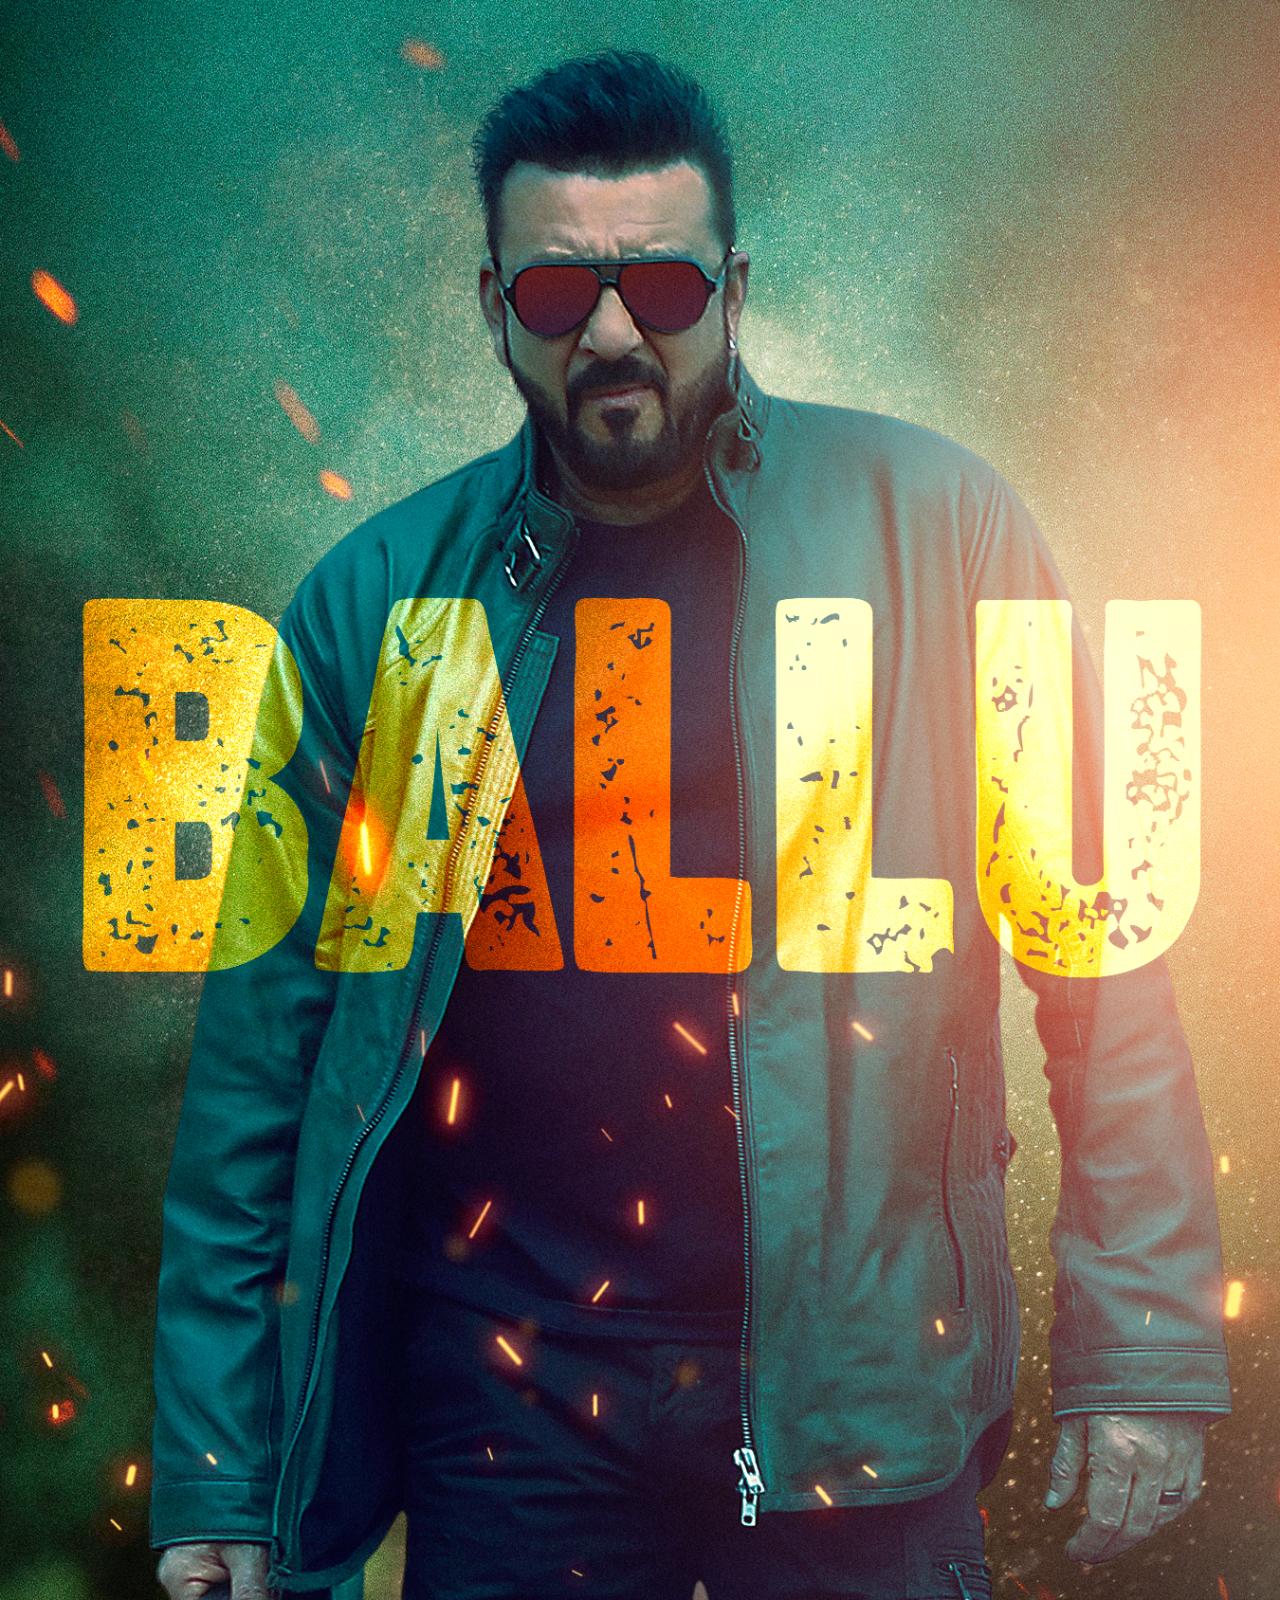 In all his swagger glory, Sanjay Dutt is seen dressed in a zipper jacket with cool shades and sporting a trimmed beard. His character has been introduced as Ballu